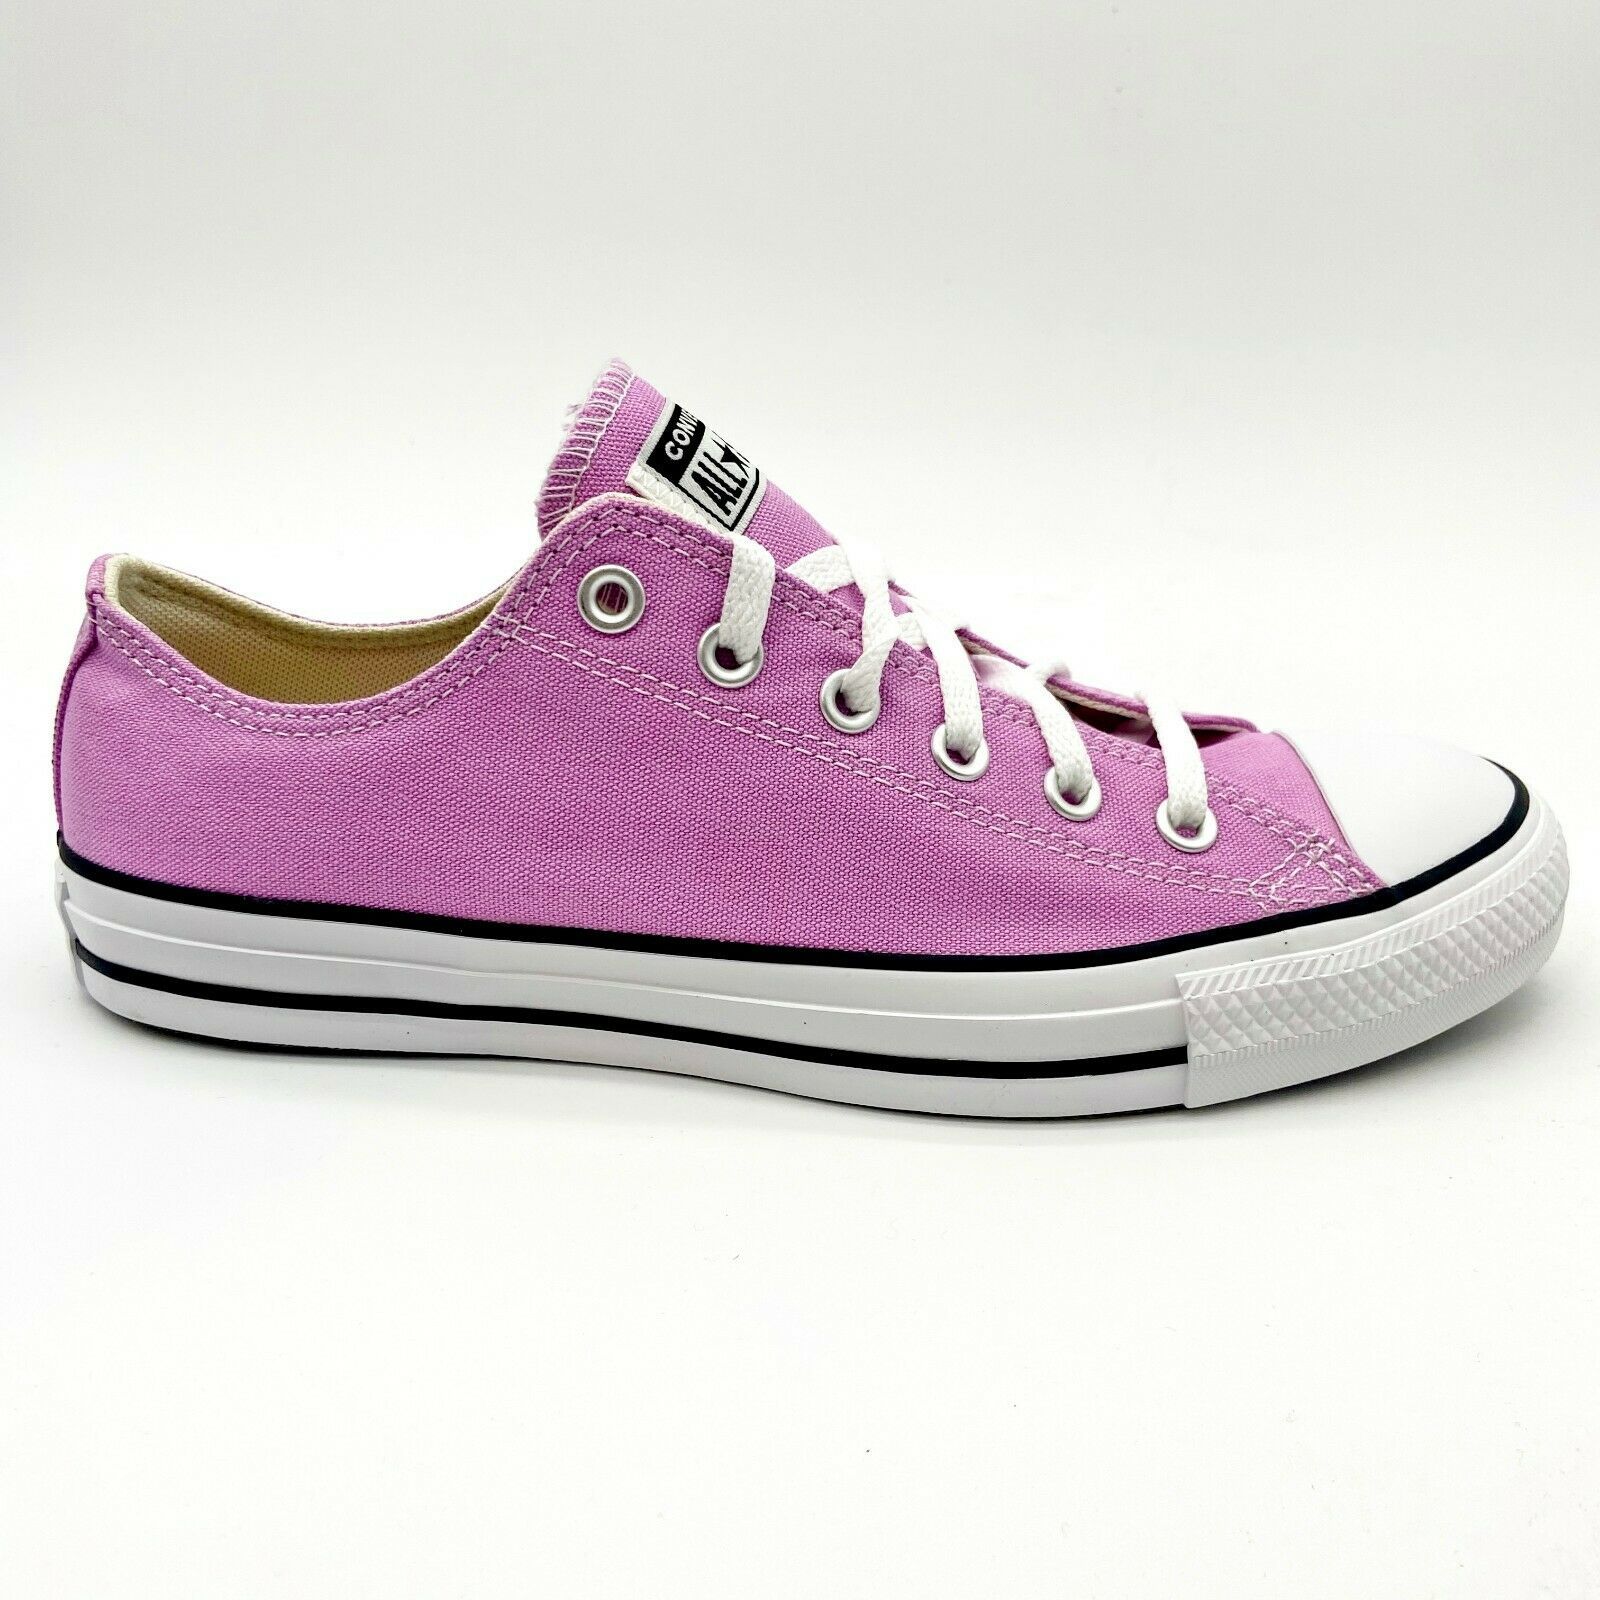 Converse Chuck Taylor All Star Ox Peony Pink Womens Shoes 166708F